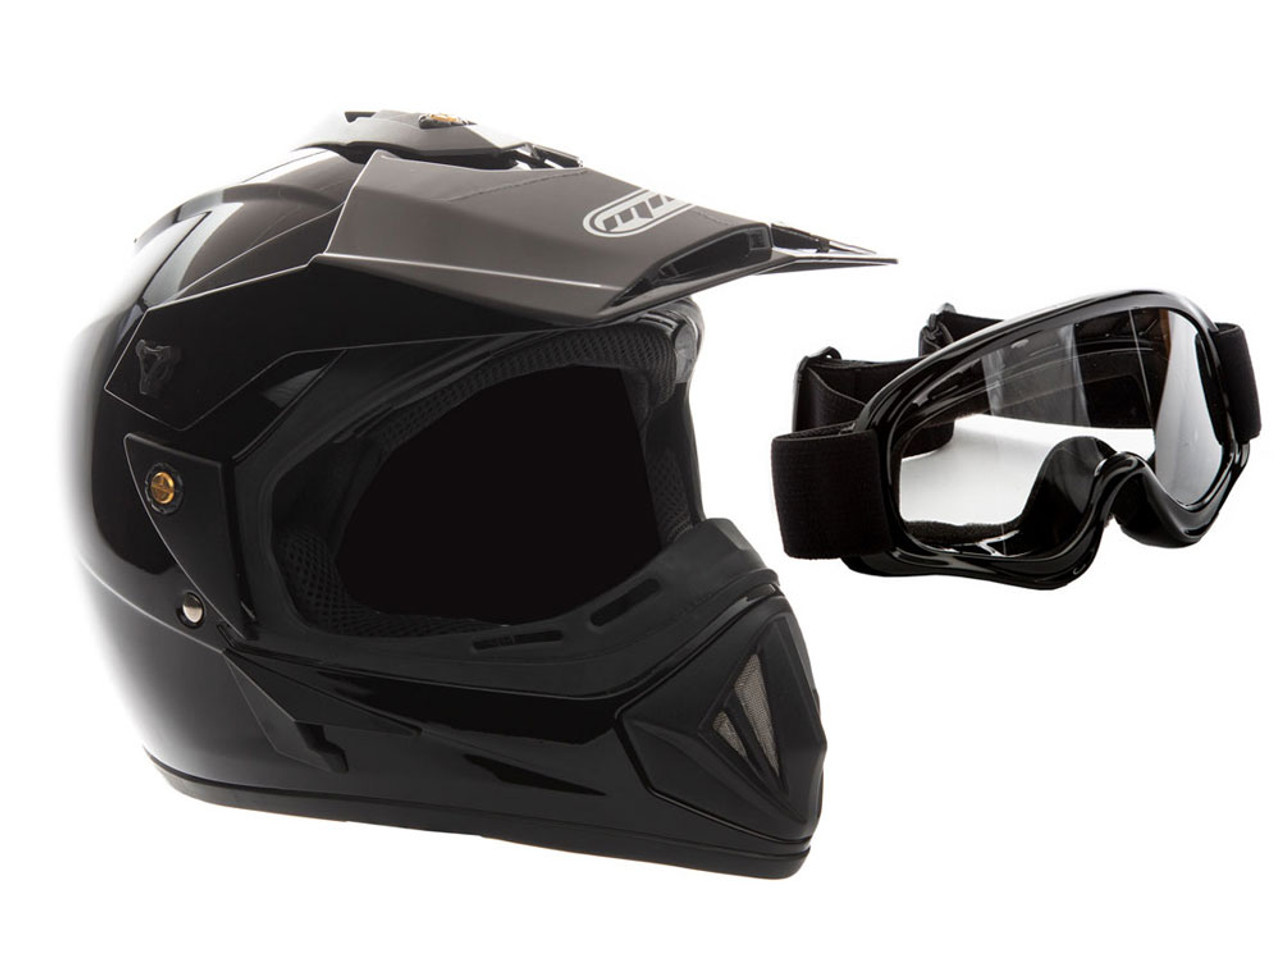 OFF Road MMG Helmet. Model 30 - DOT Approved (FREE GOGGLES INCLUDED)